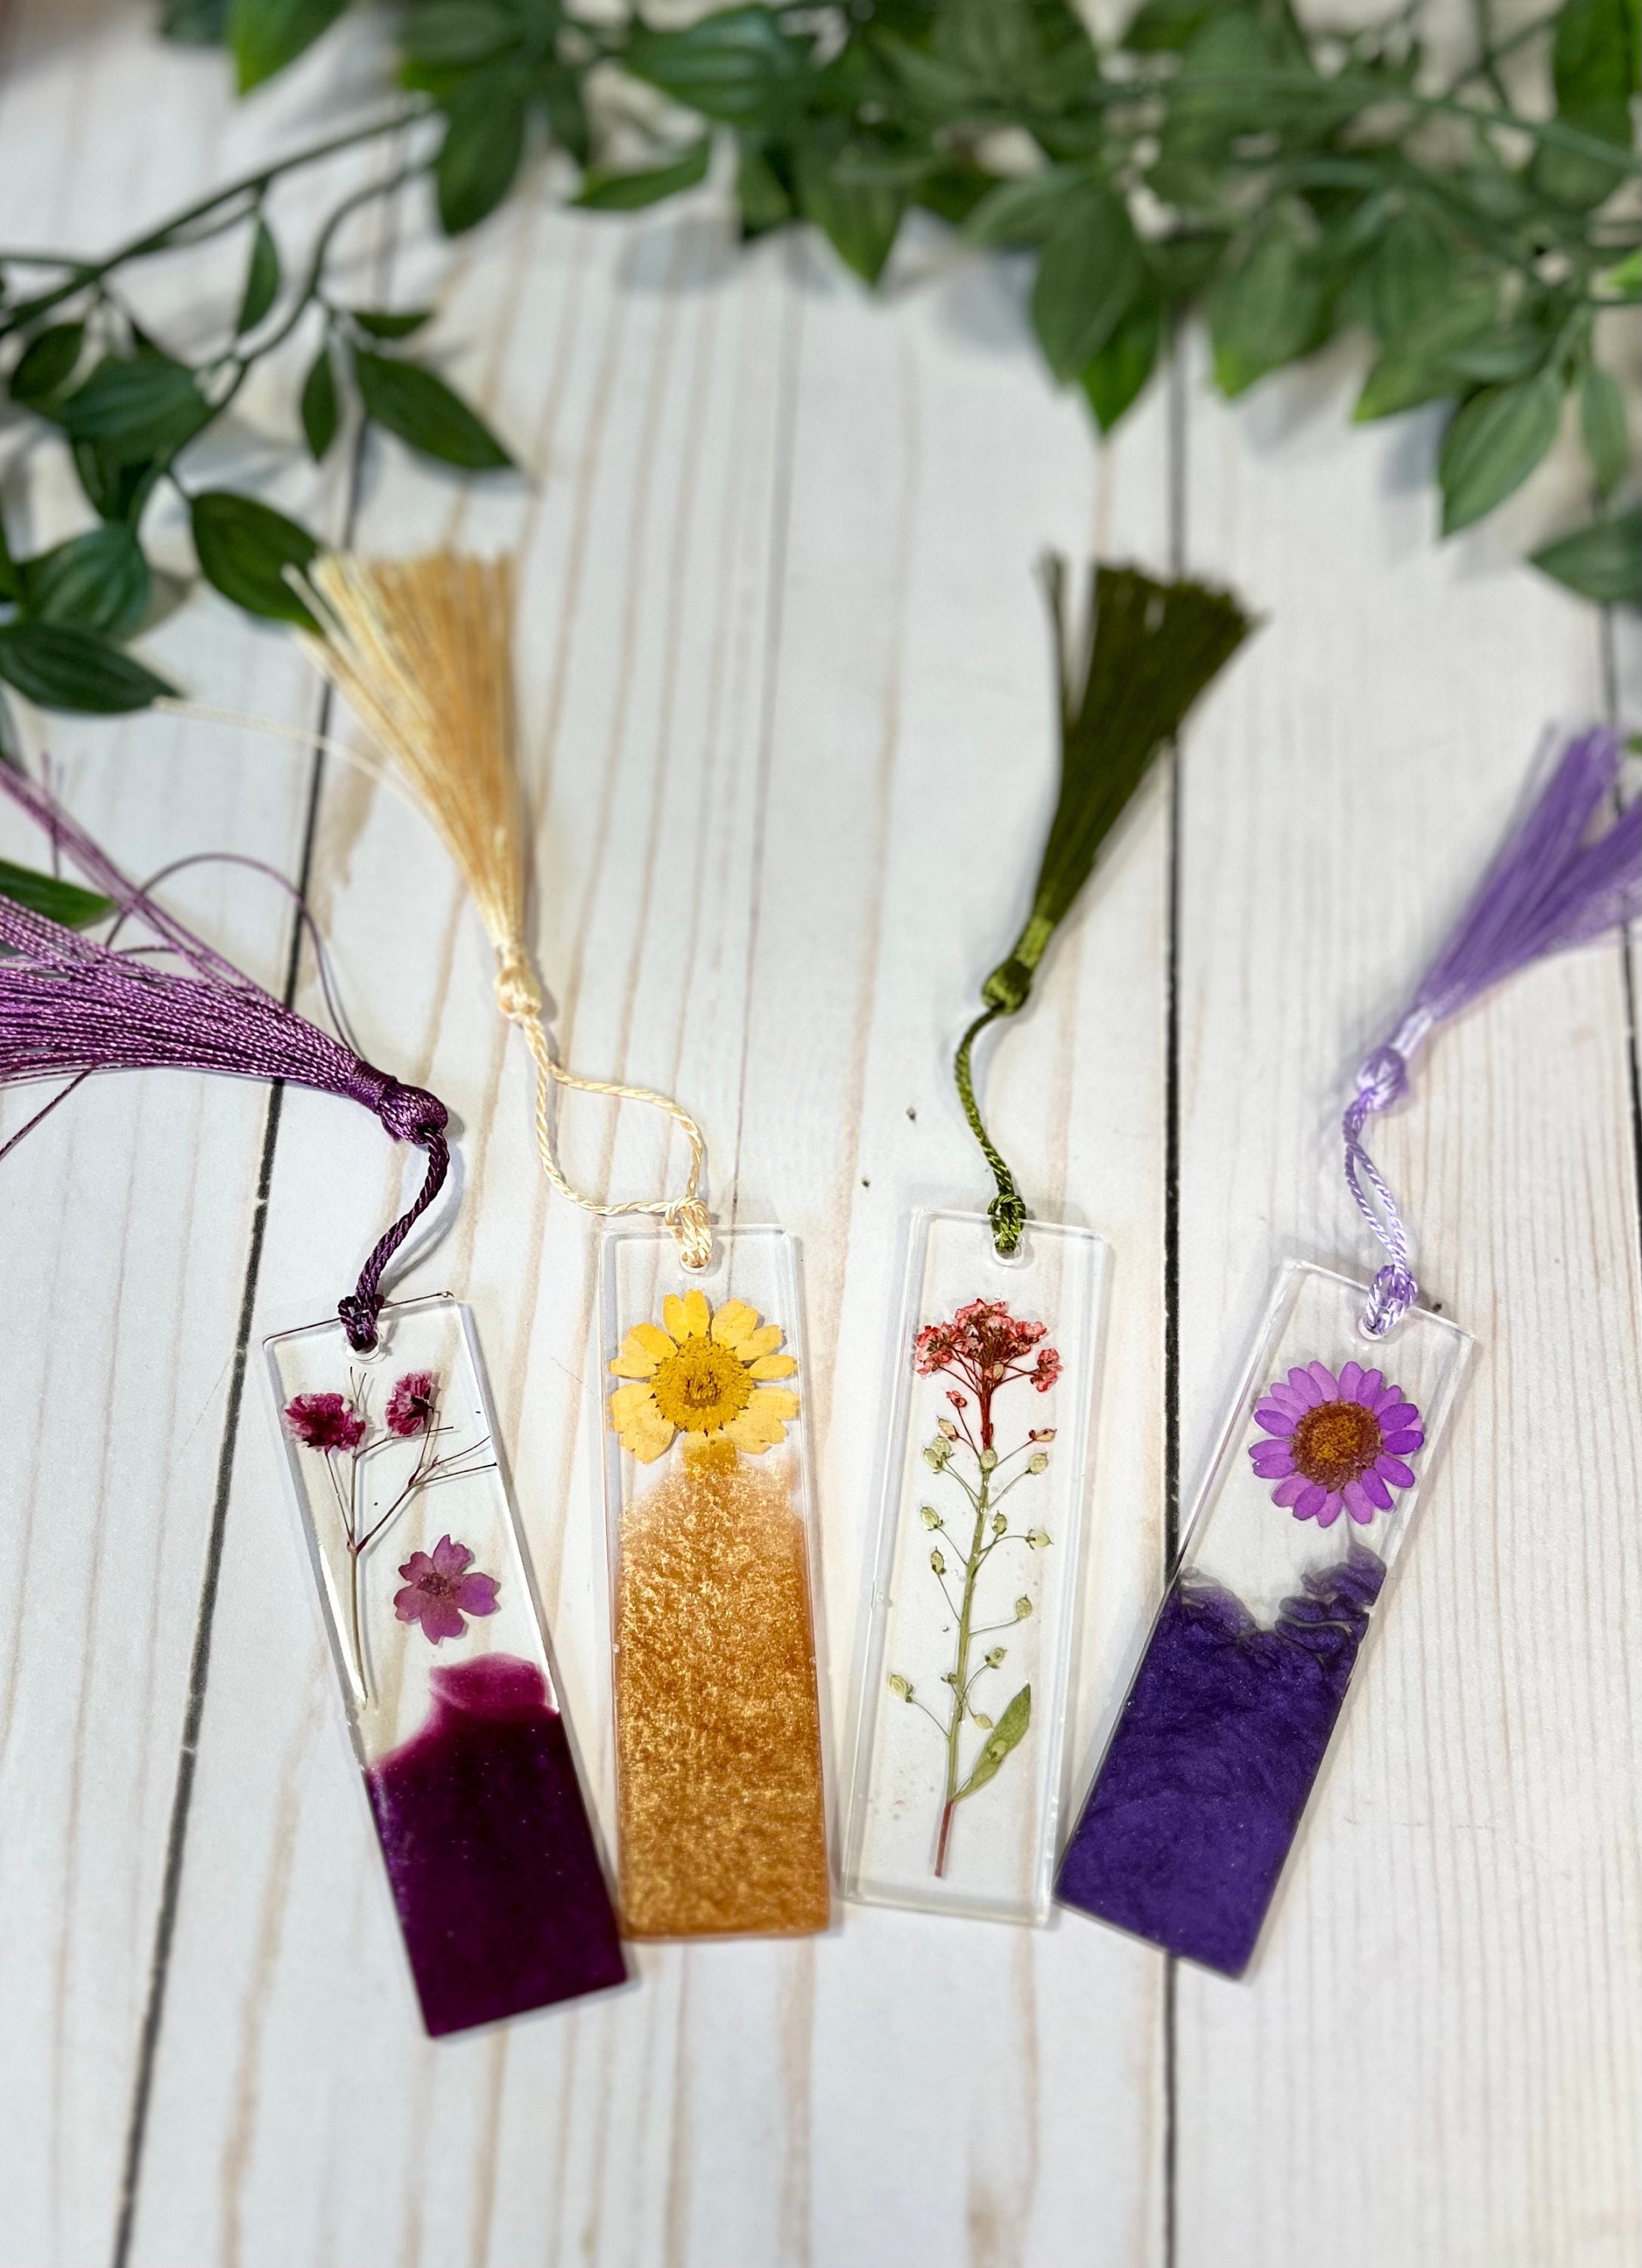 My hand made pressed flower resin bookmarks : r/crafts